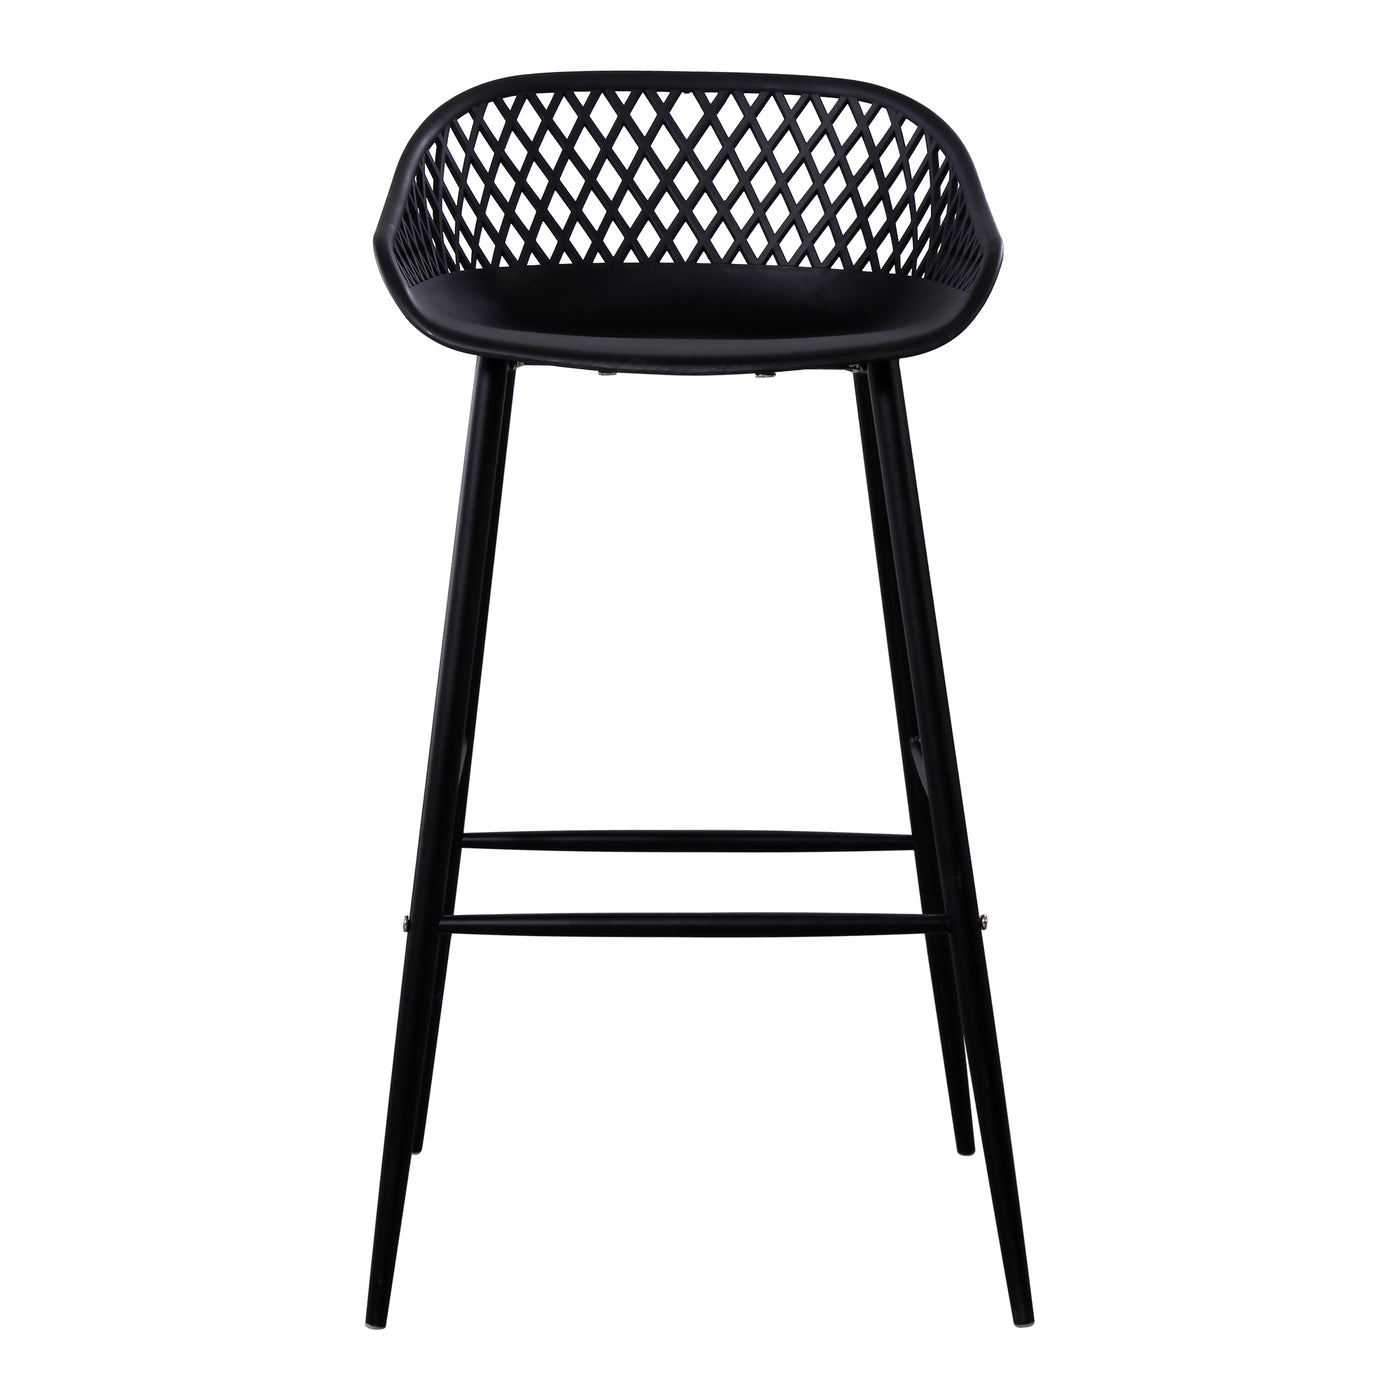 Take a seat in the stylish and comfortable Piazza Bar Stool. Made with a durable polypropylene, this chair comes in severa...